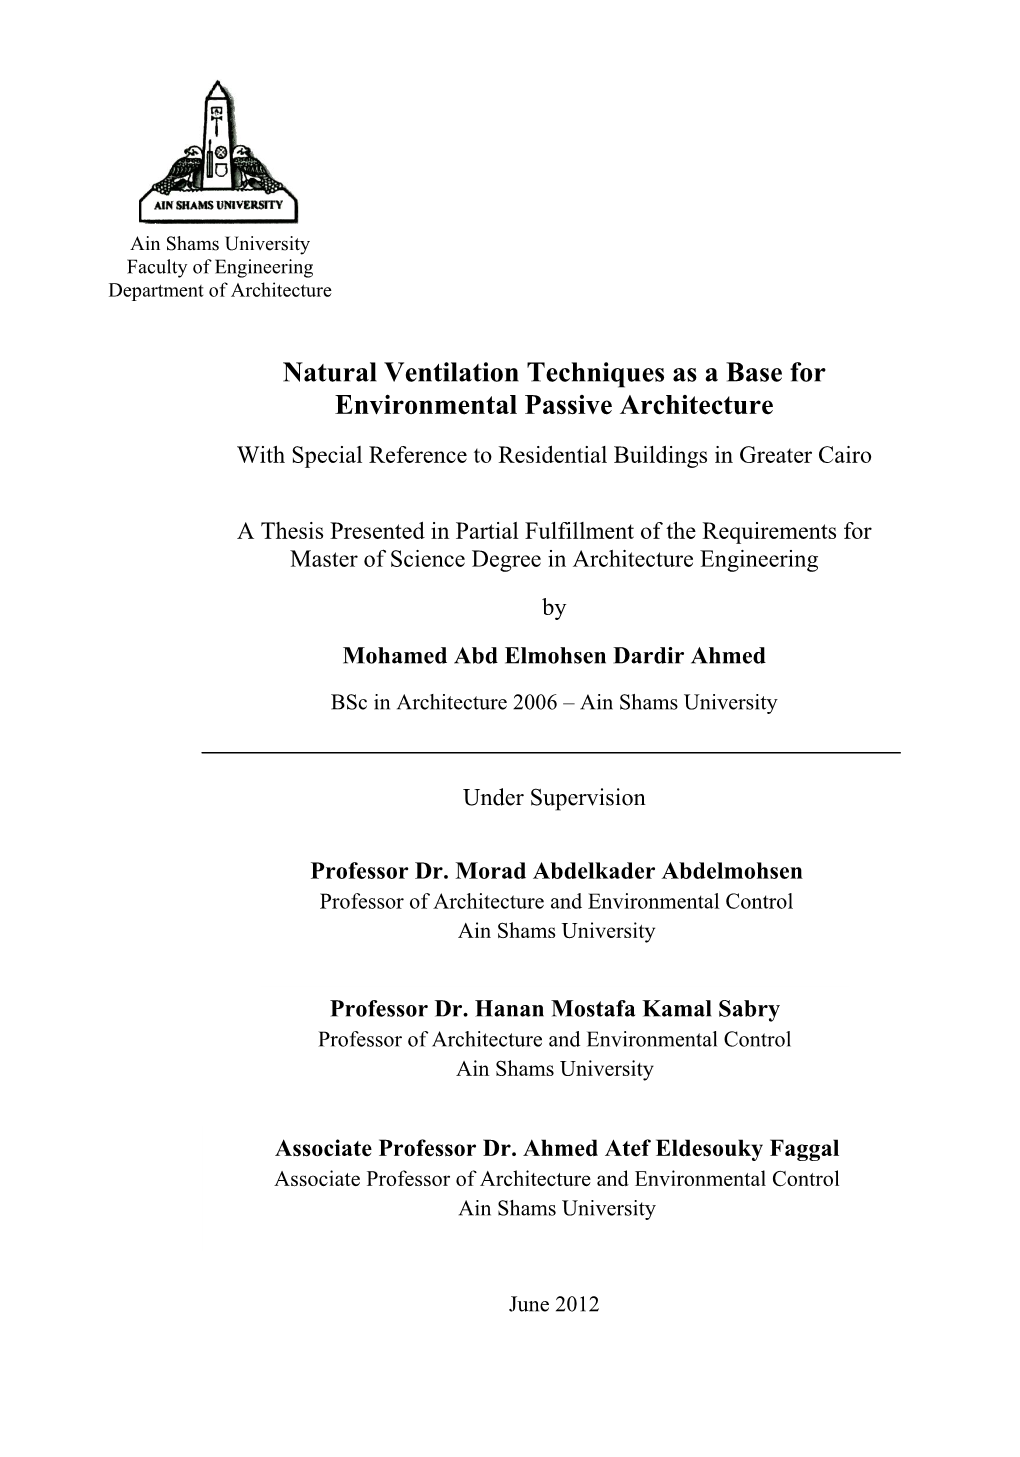 Natural Ventilation Techniques As a Base for Environmental Passive Architecture with Special Reference to Residential Buildings in Greater Cairo